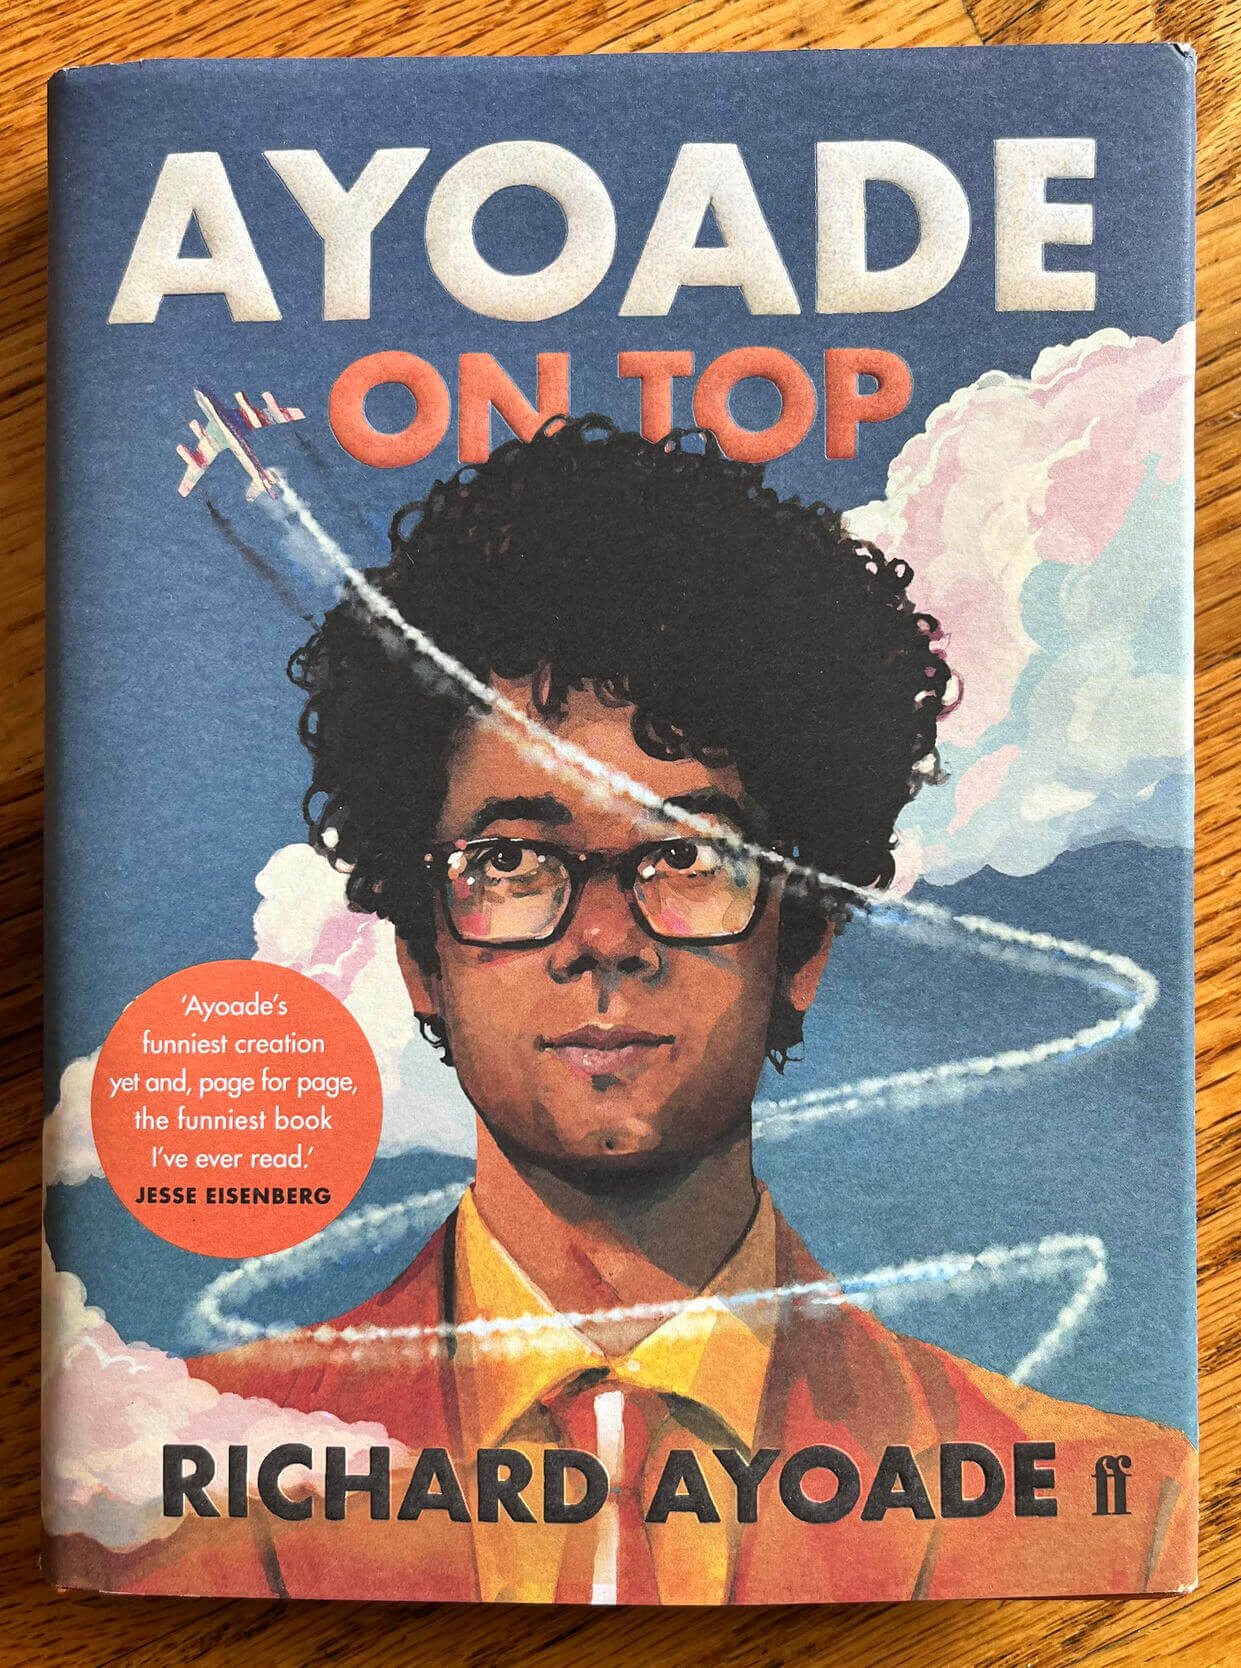 “Ayoade on Top” by Richard Ayoade.